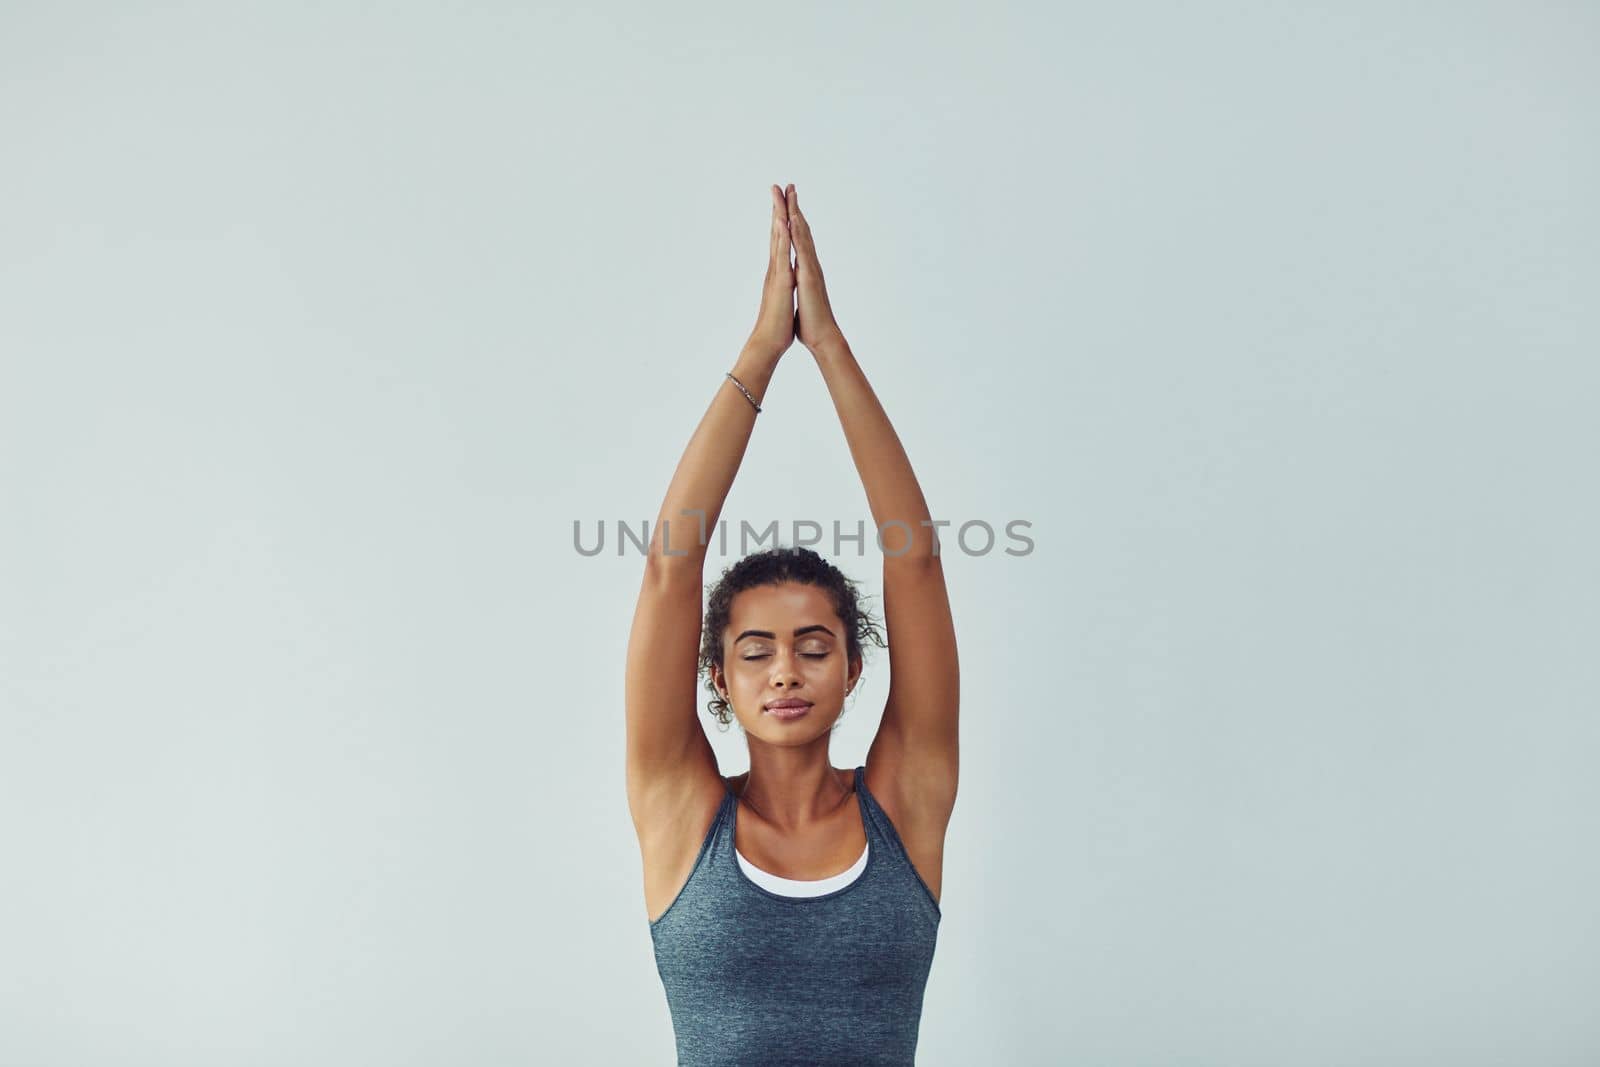 Yoga is the journey and the destination. Studio shot of an attractive young woman practicing yoga against a grey background